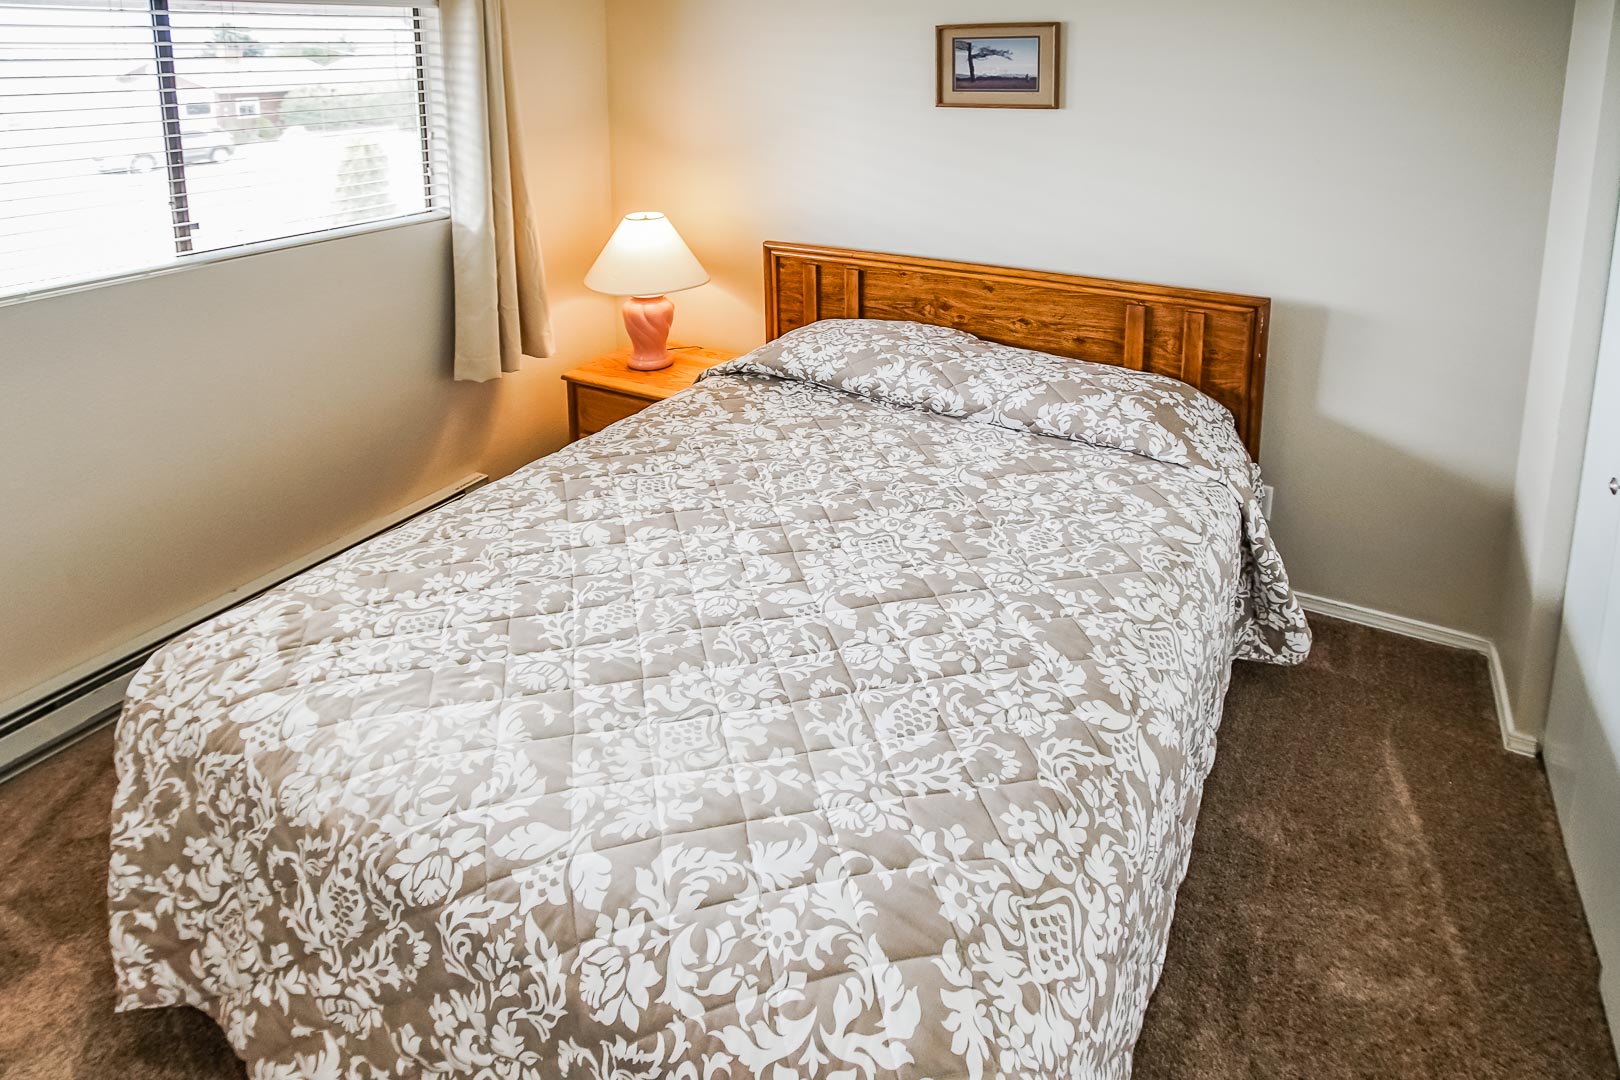 A Two- bedroom unit with a queen bed at VRI's Cabana Club in Blaine, Washington.